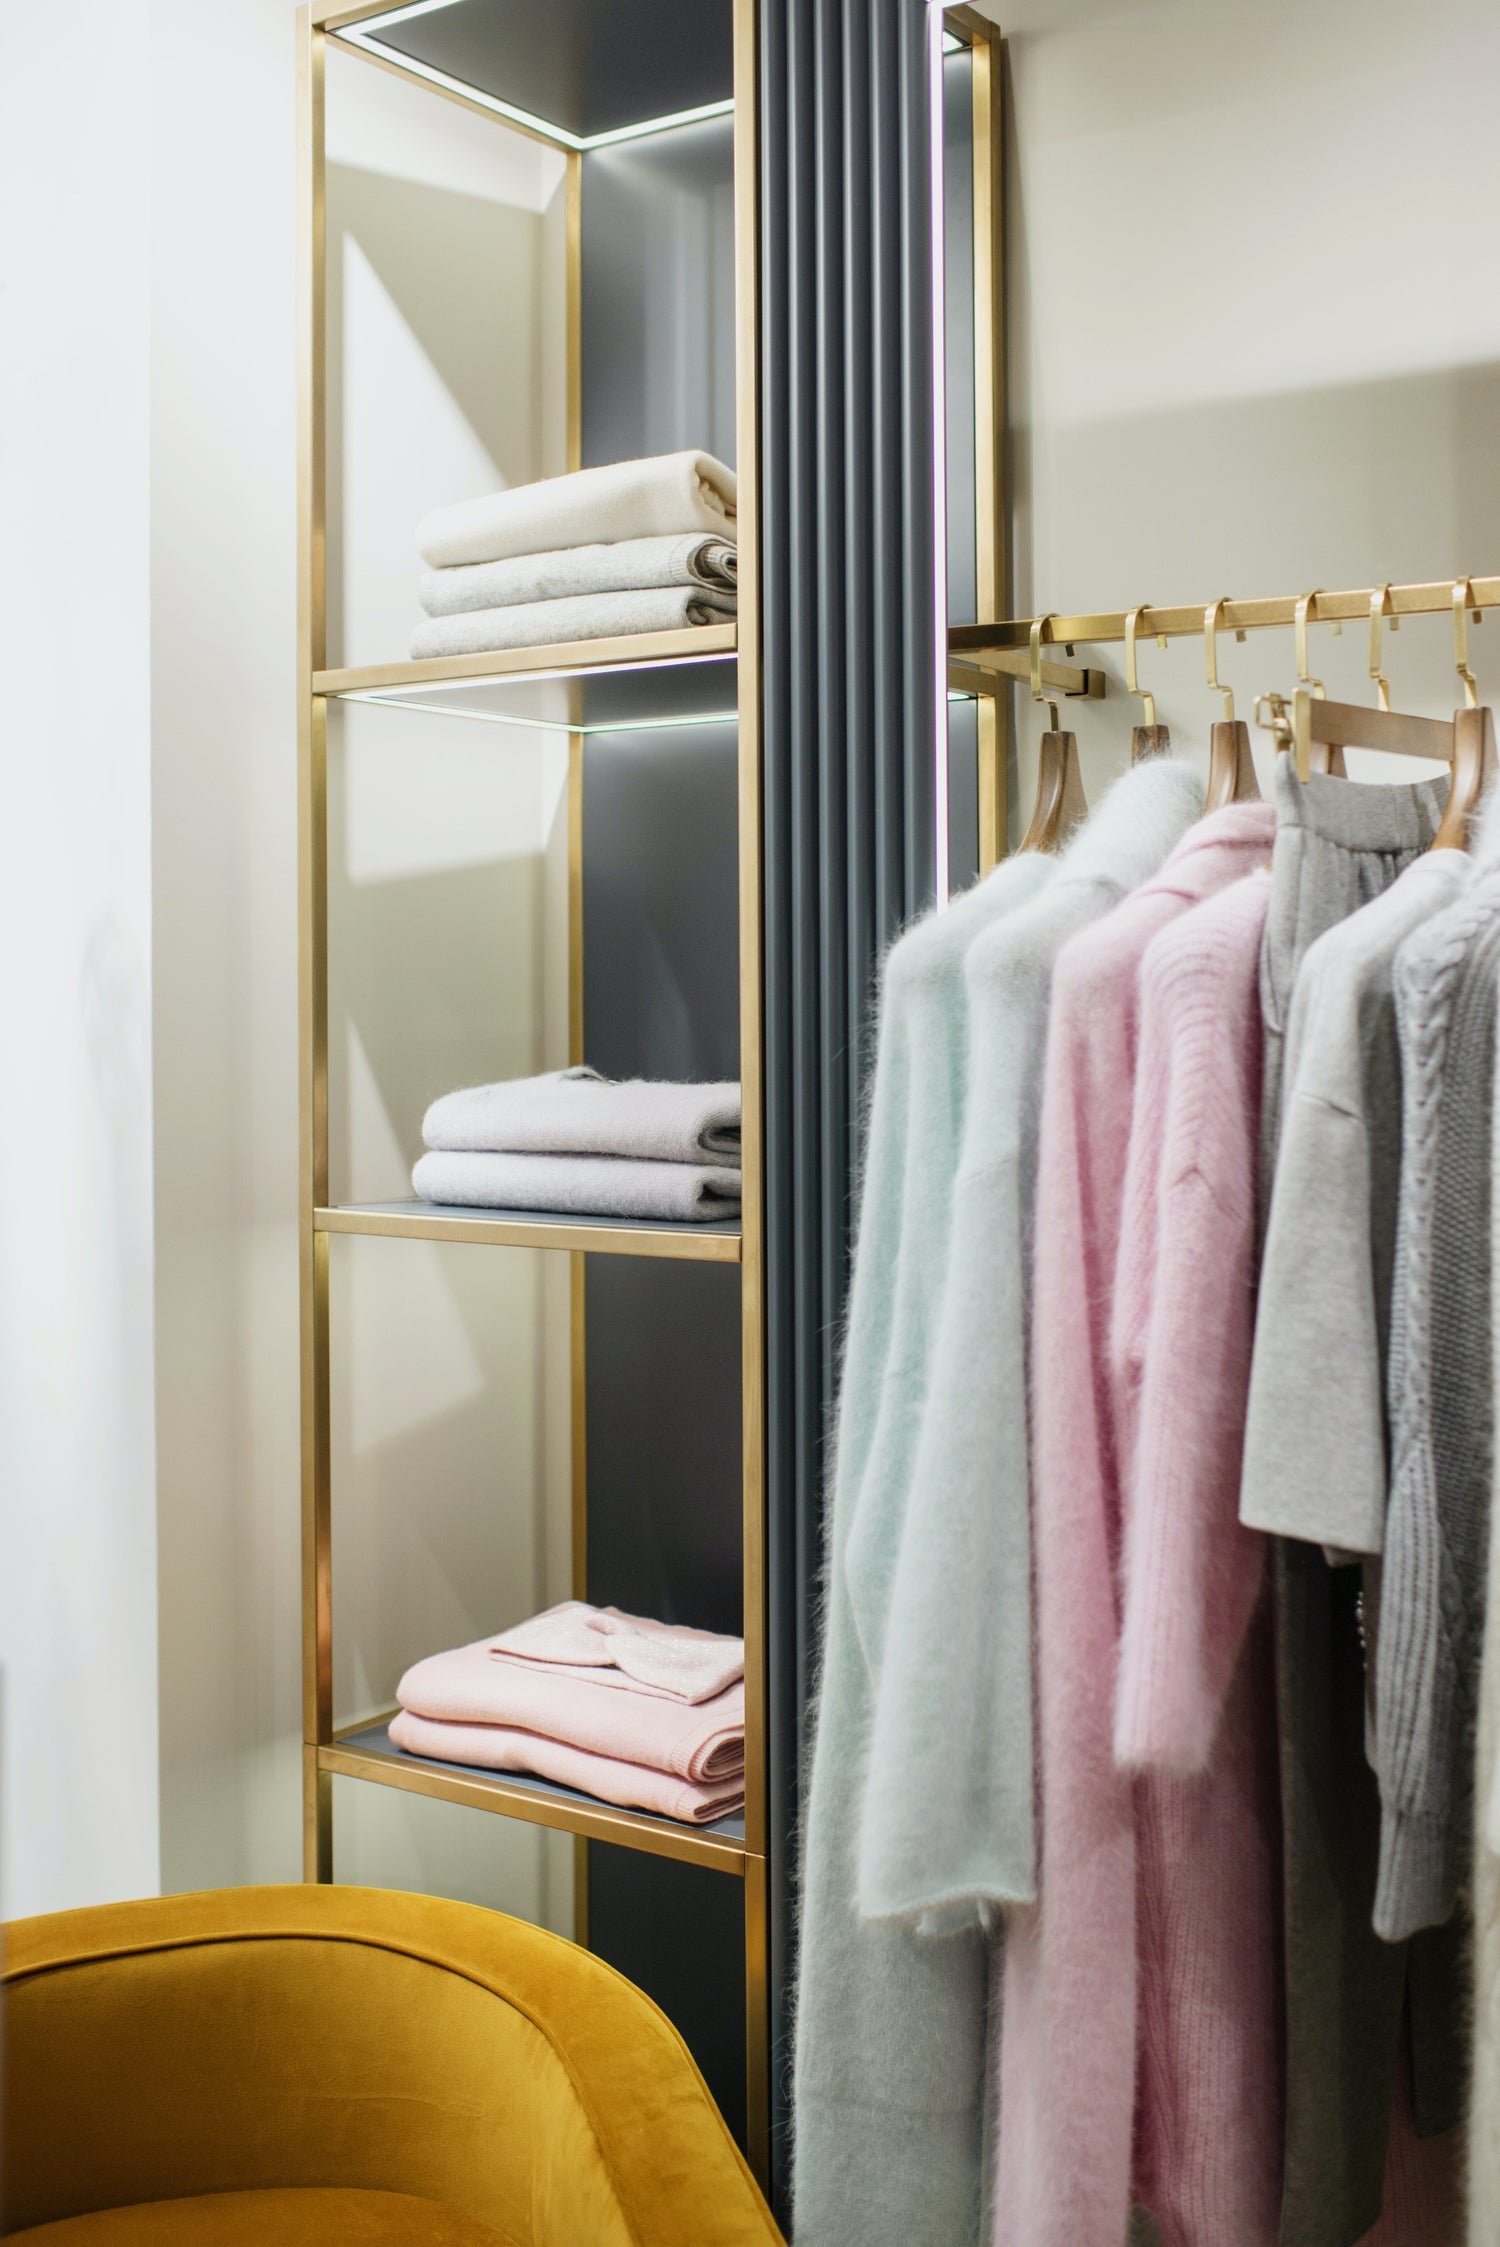 Closet Shelves: The Easy Way to Double Hanging Space